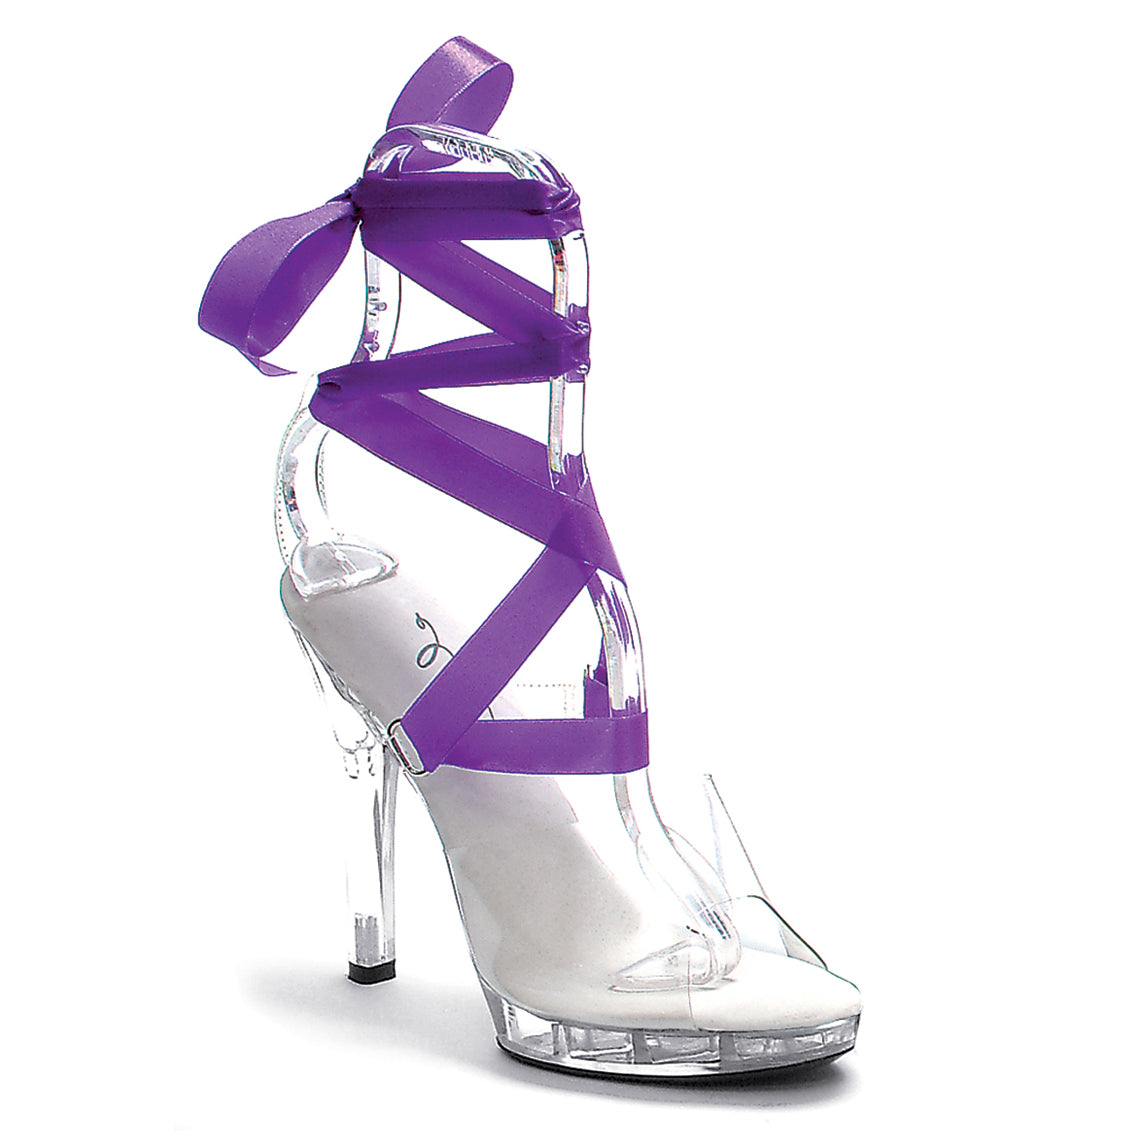 5 Heel Sandal  With 7 Interchangeable Ribbons